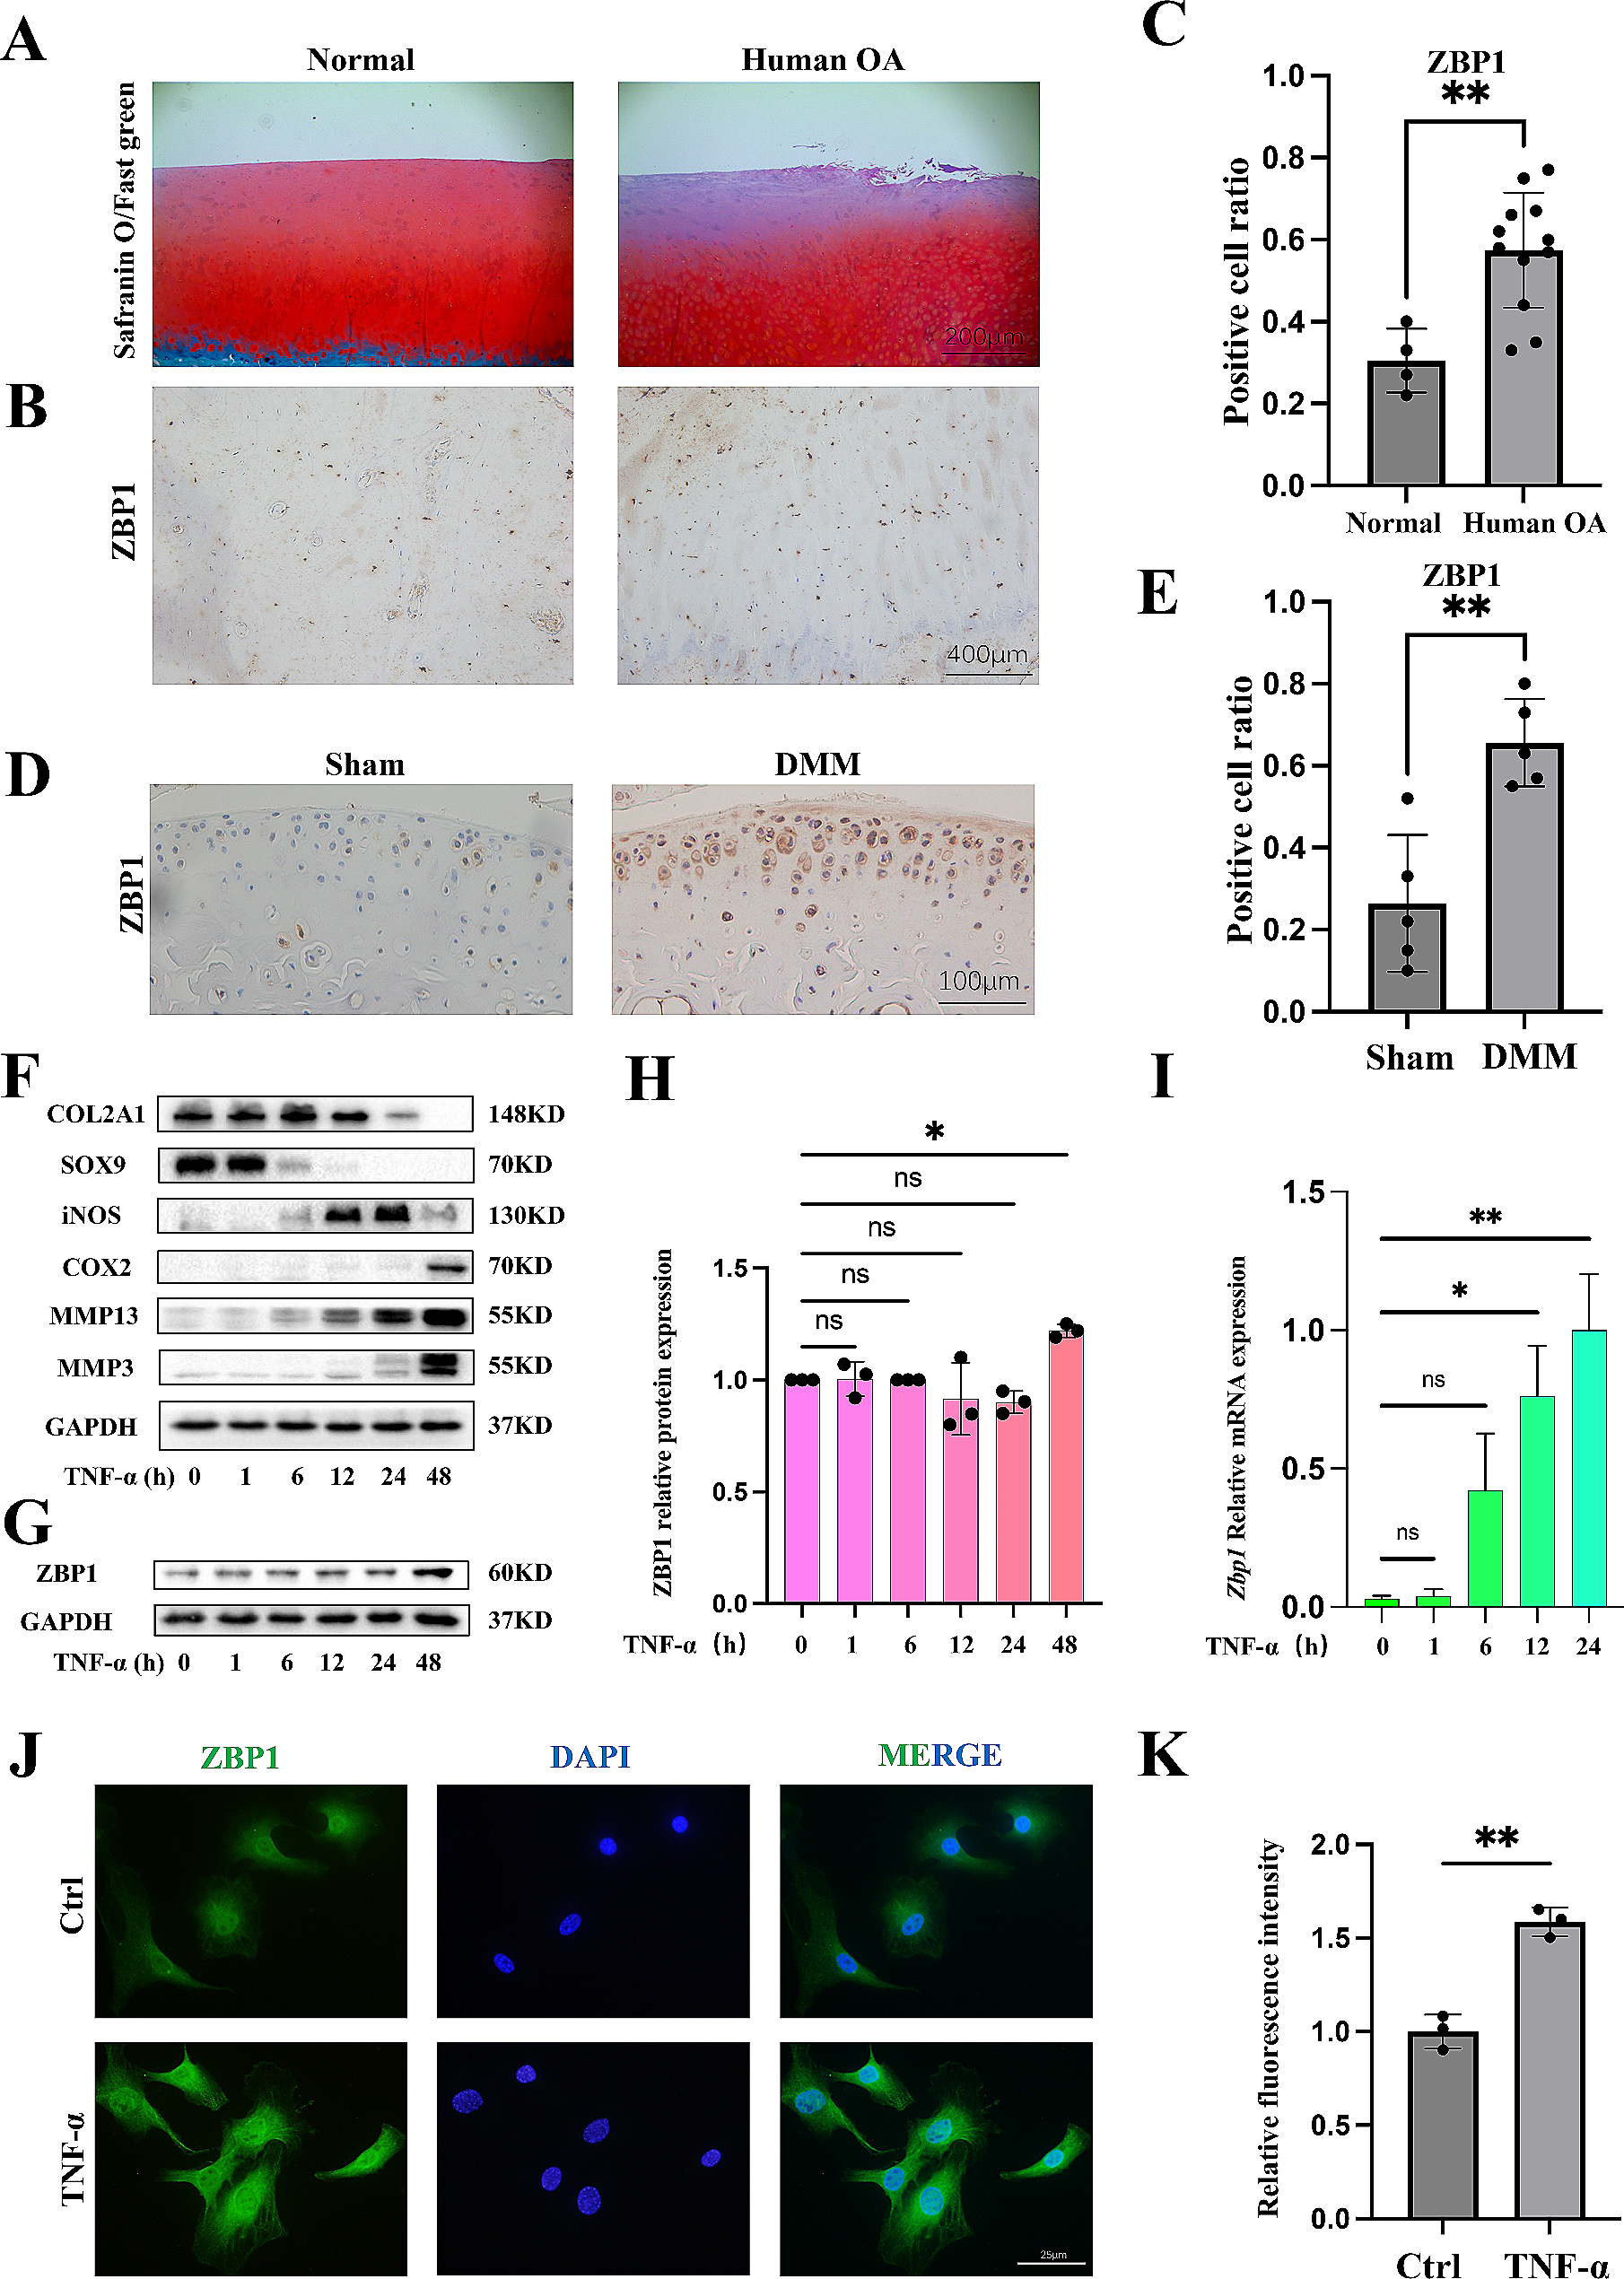 IRF1 regulation of ZBP1 links mitochondrial DNA and chondrocyte damage in osteoarthritis